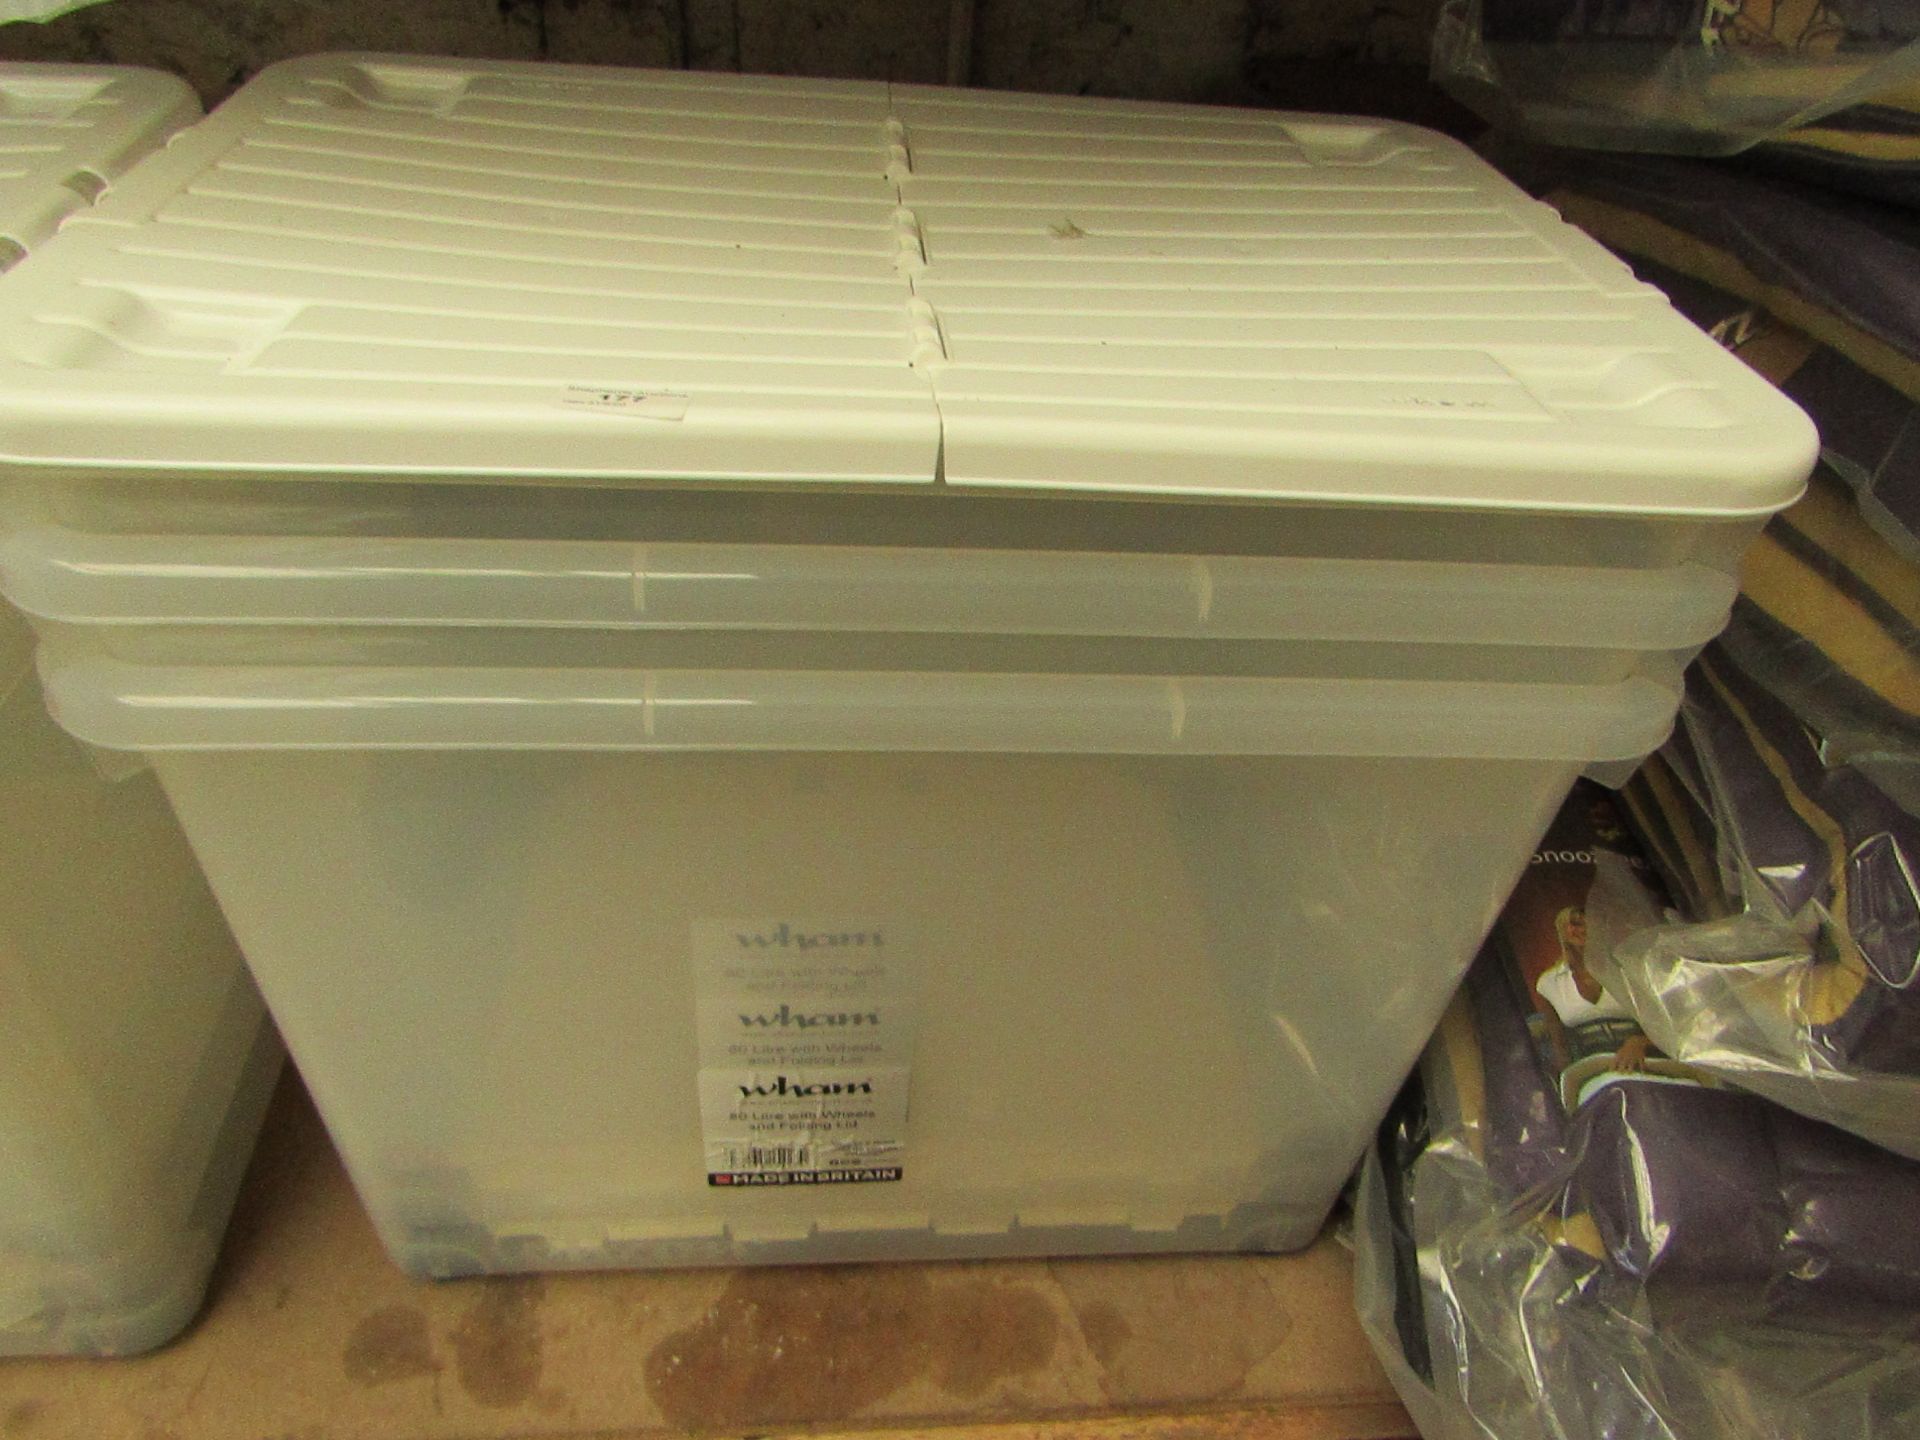 3 x Wham 80L Storage Boxes with Wheels & Folding lids. Unchecked